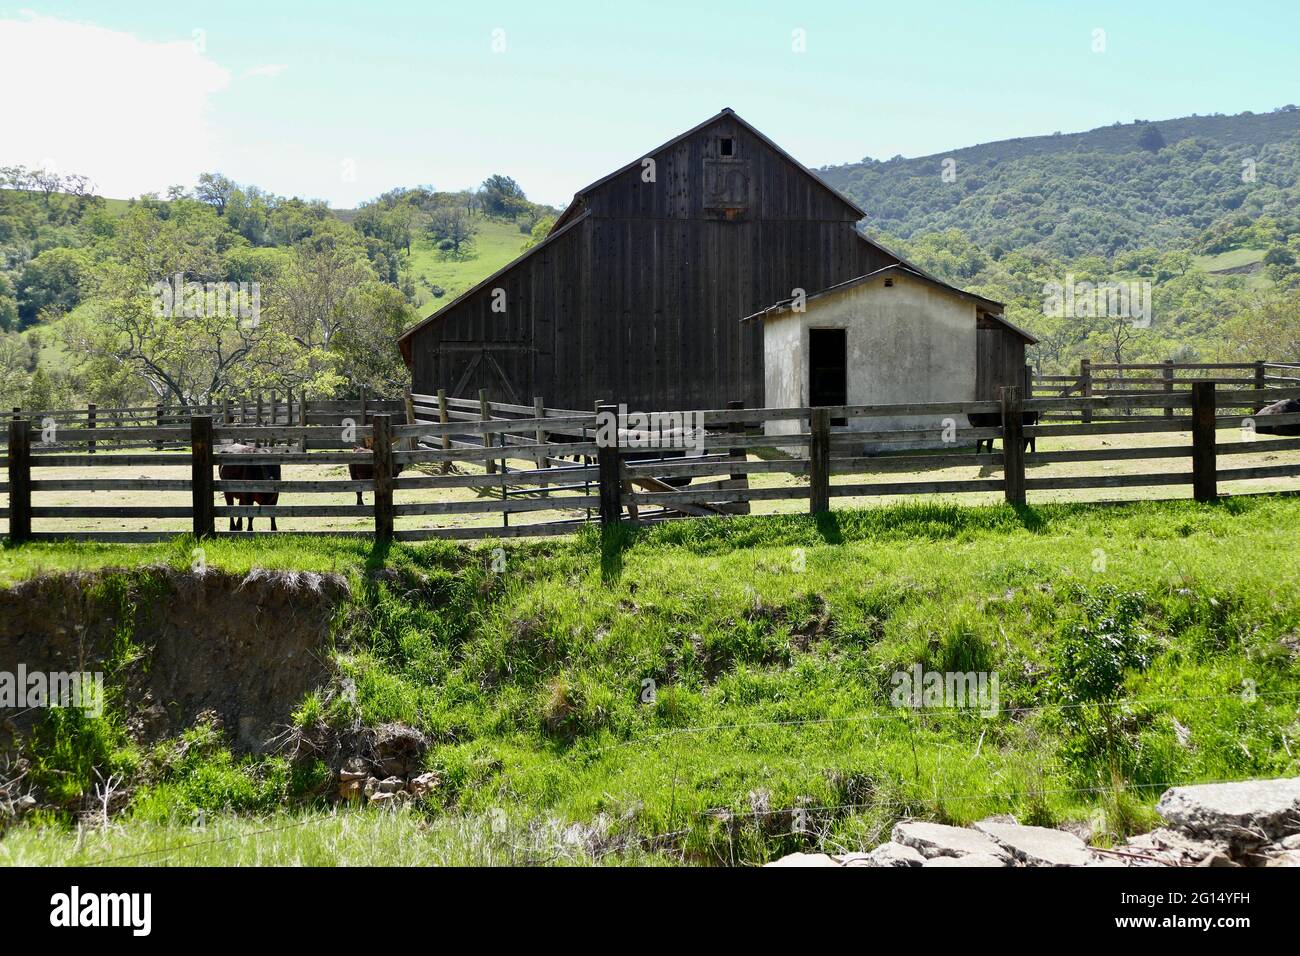 cattle ranch with vintage barn and fenced paddock Stock Photo